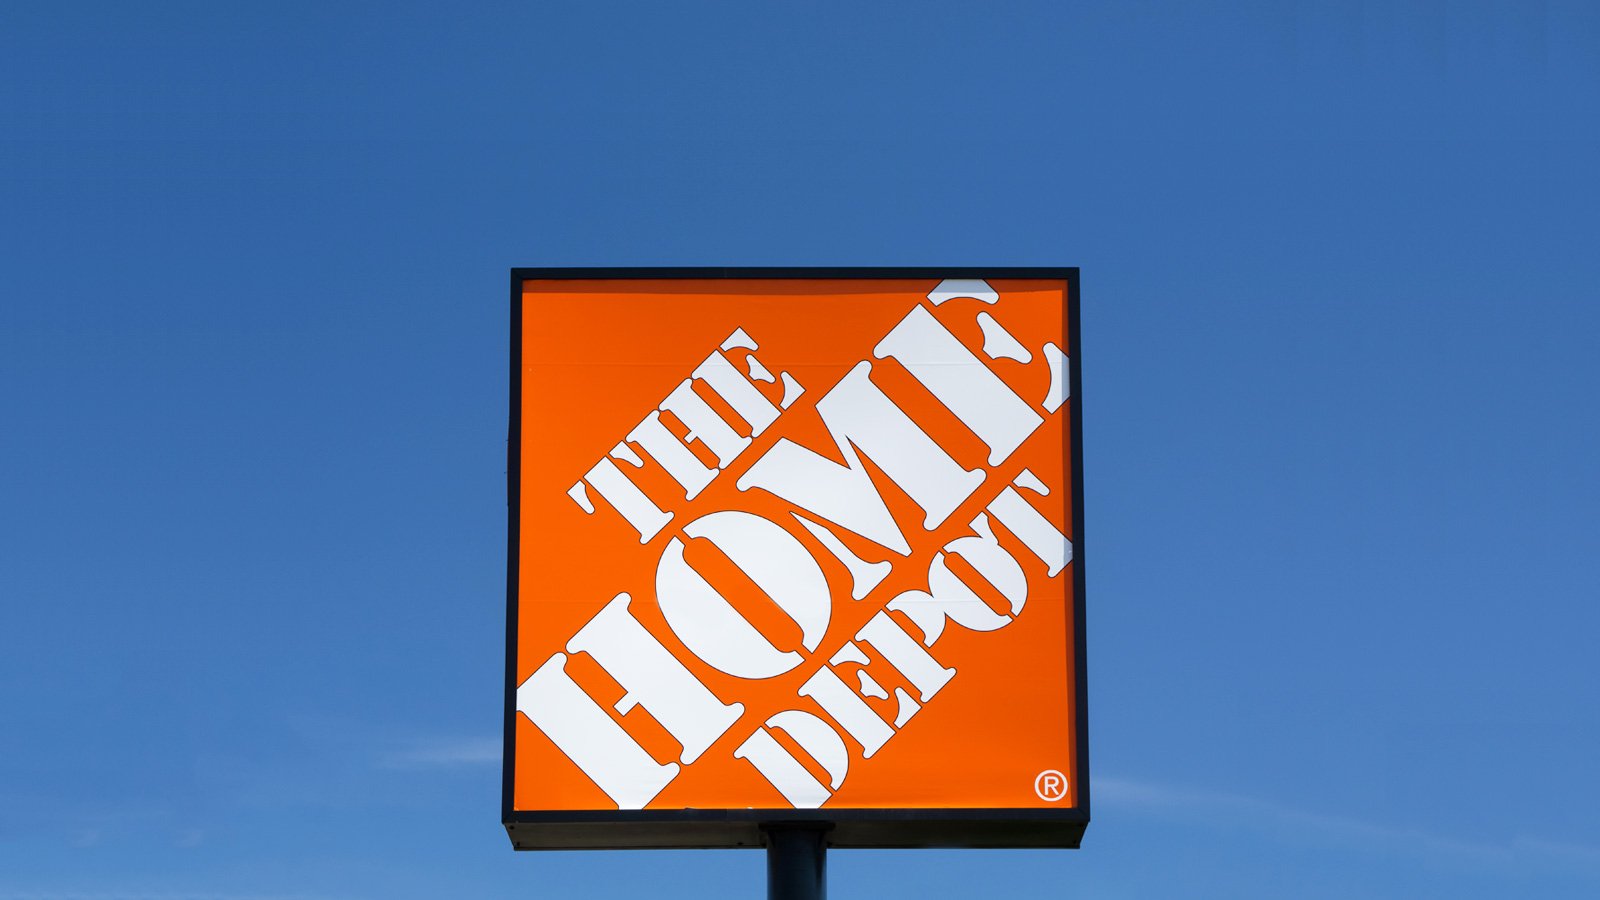 The Home Depot sign